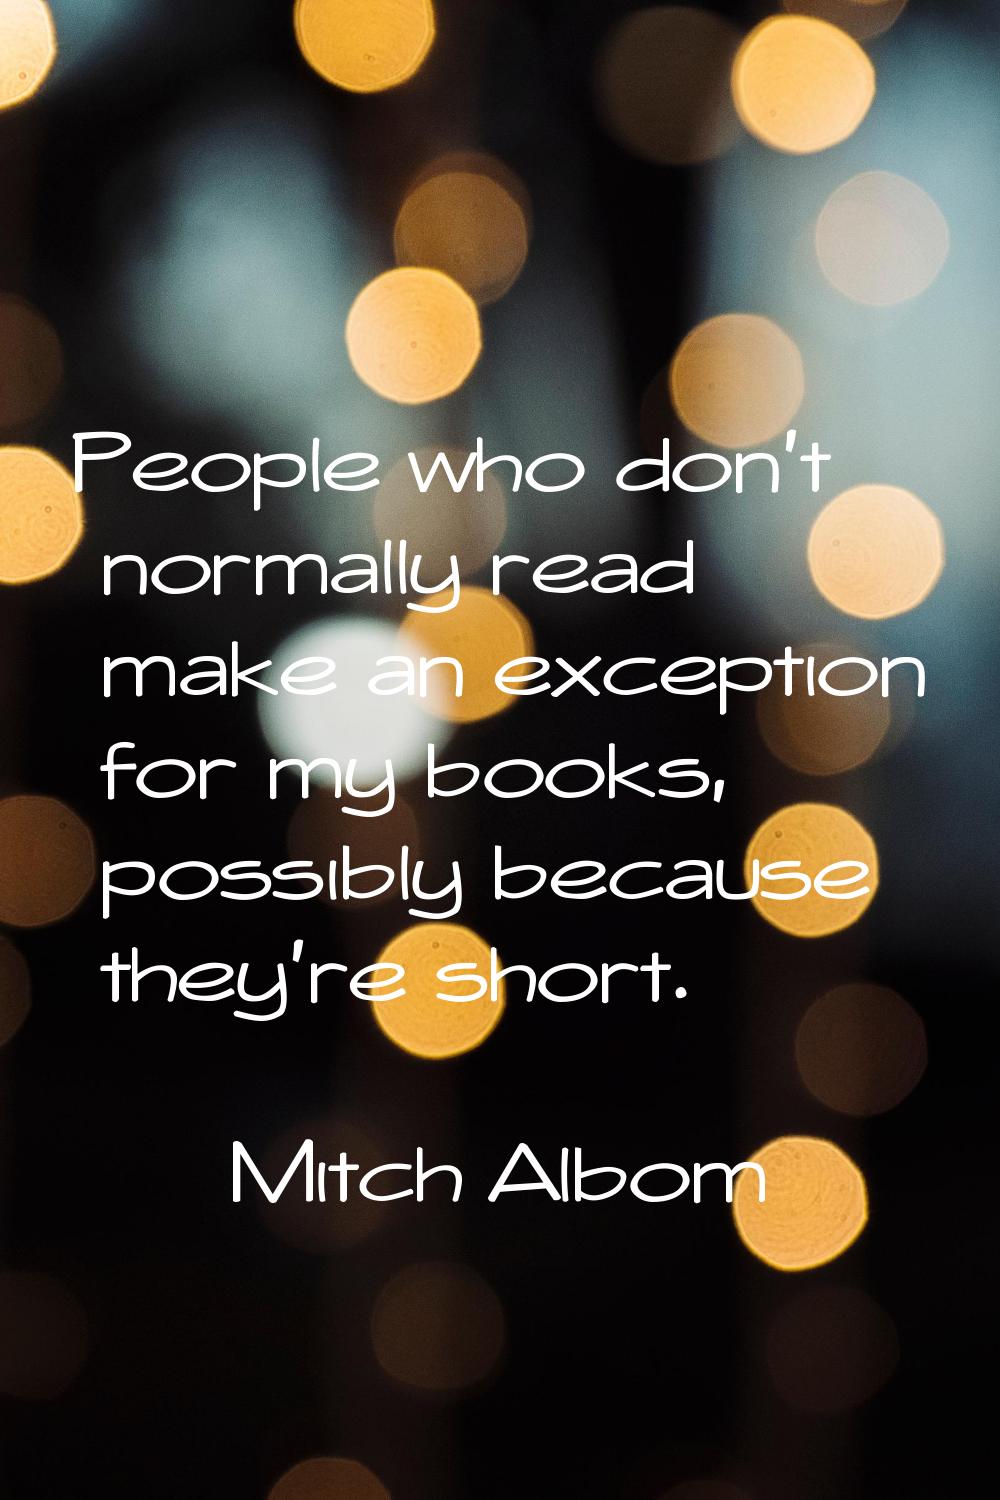 People who don't normally read make an exception for my books, possibly because they're short.